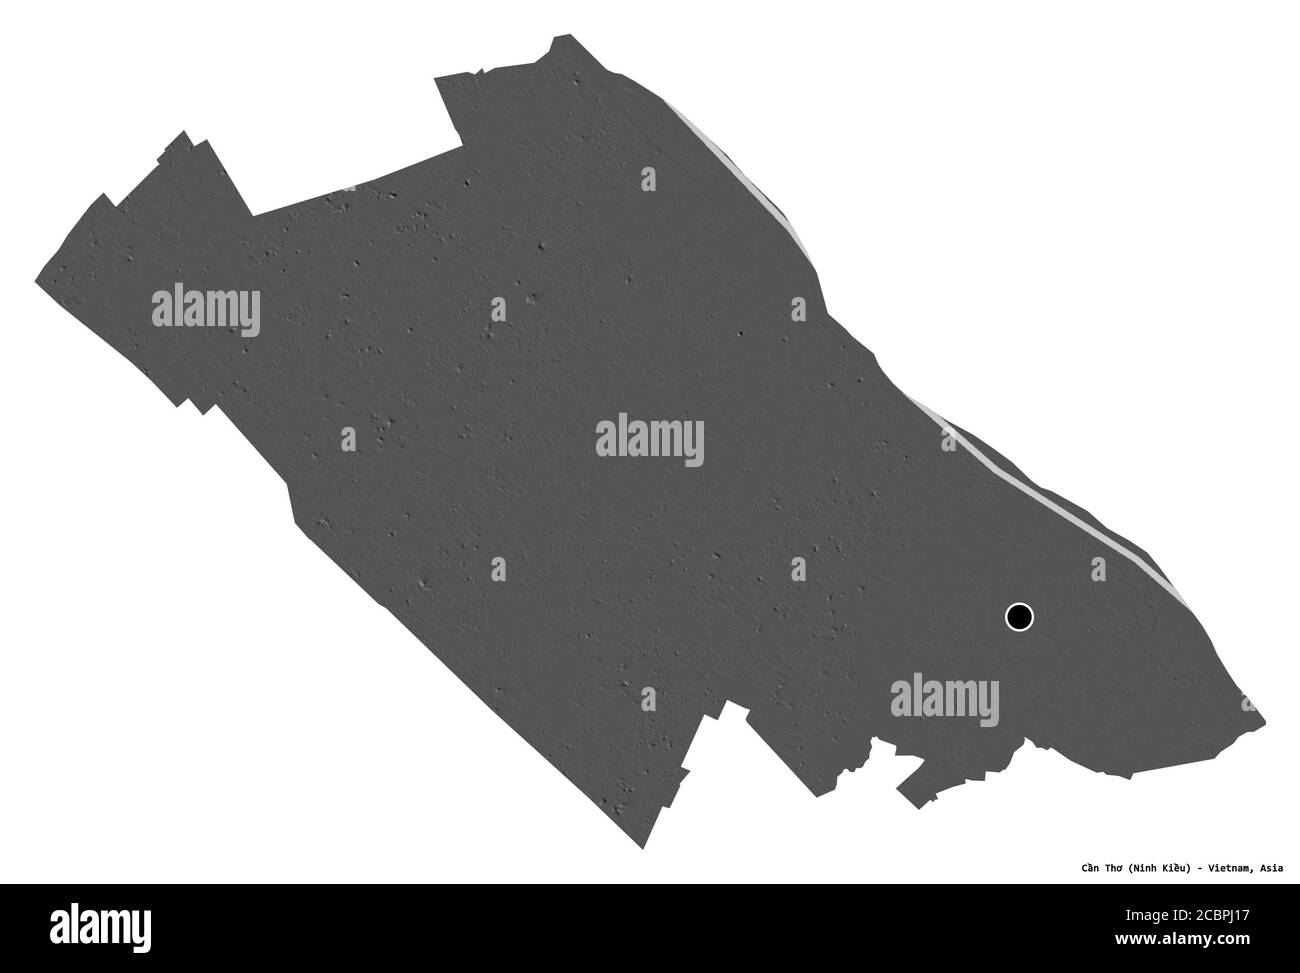 Shape of Cần Thơ, city of Vietnam, with its capital isolated on white background. Bilevel elevation map. 3D rendering Stock Photo